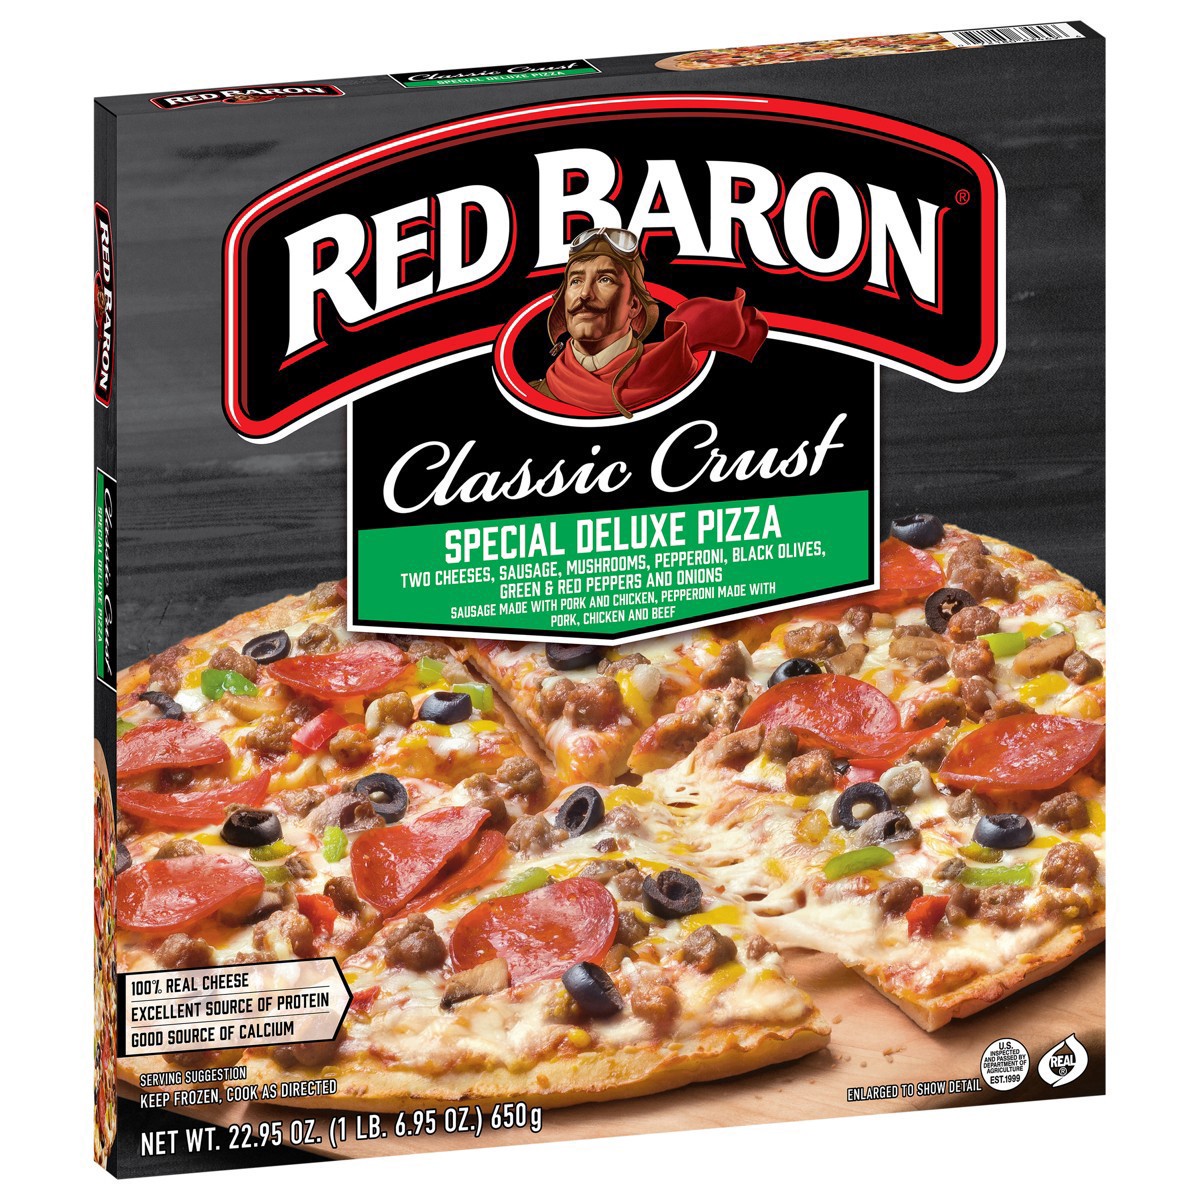 slide 15 of 89, Red Baron Frozen Pizza Classic Crust Special Deluxe, 1.43 lb